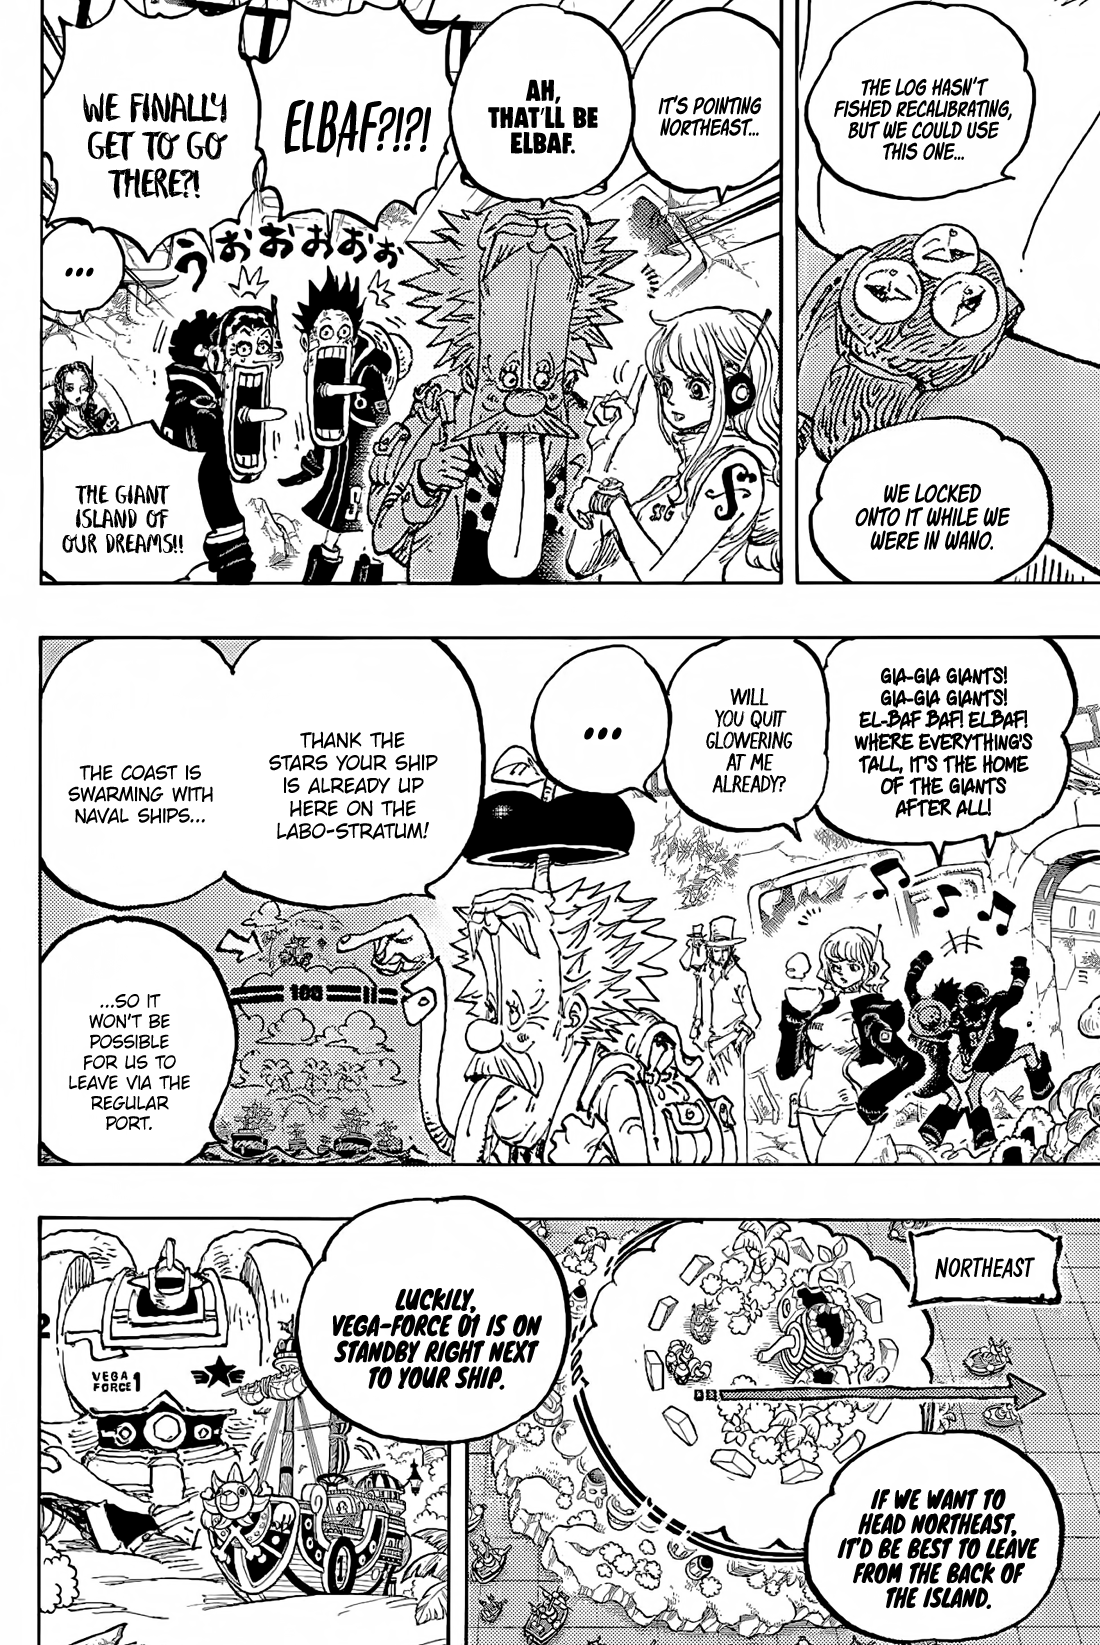 Spoiler - One Piece Chapter 1058 Spoilers Discussion, Page 800